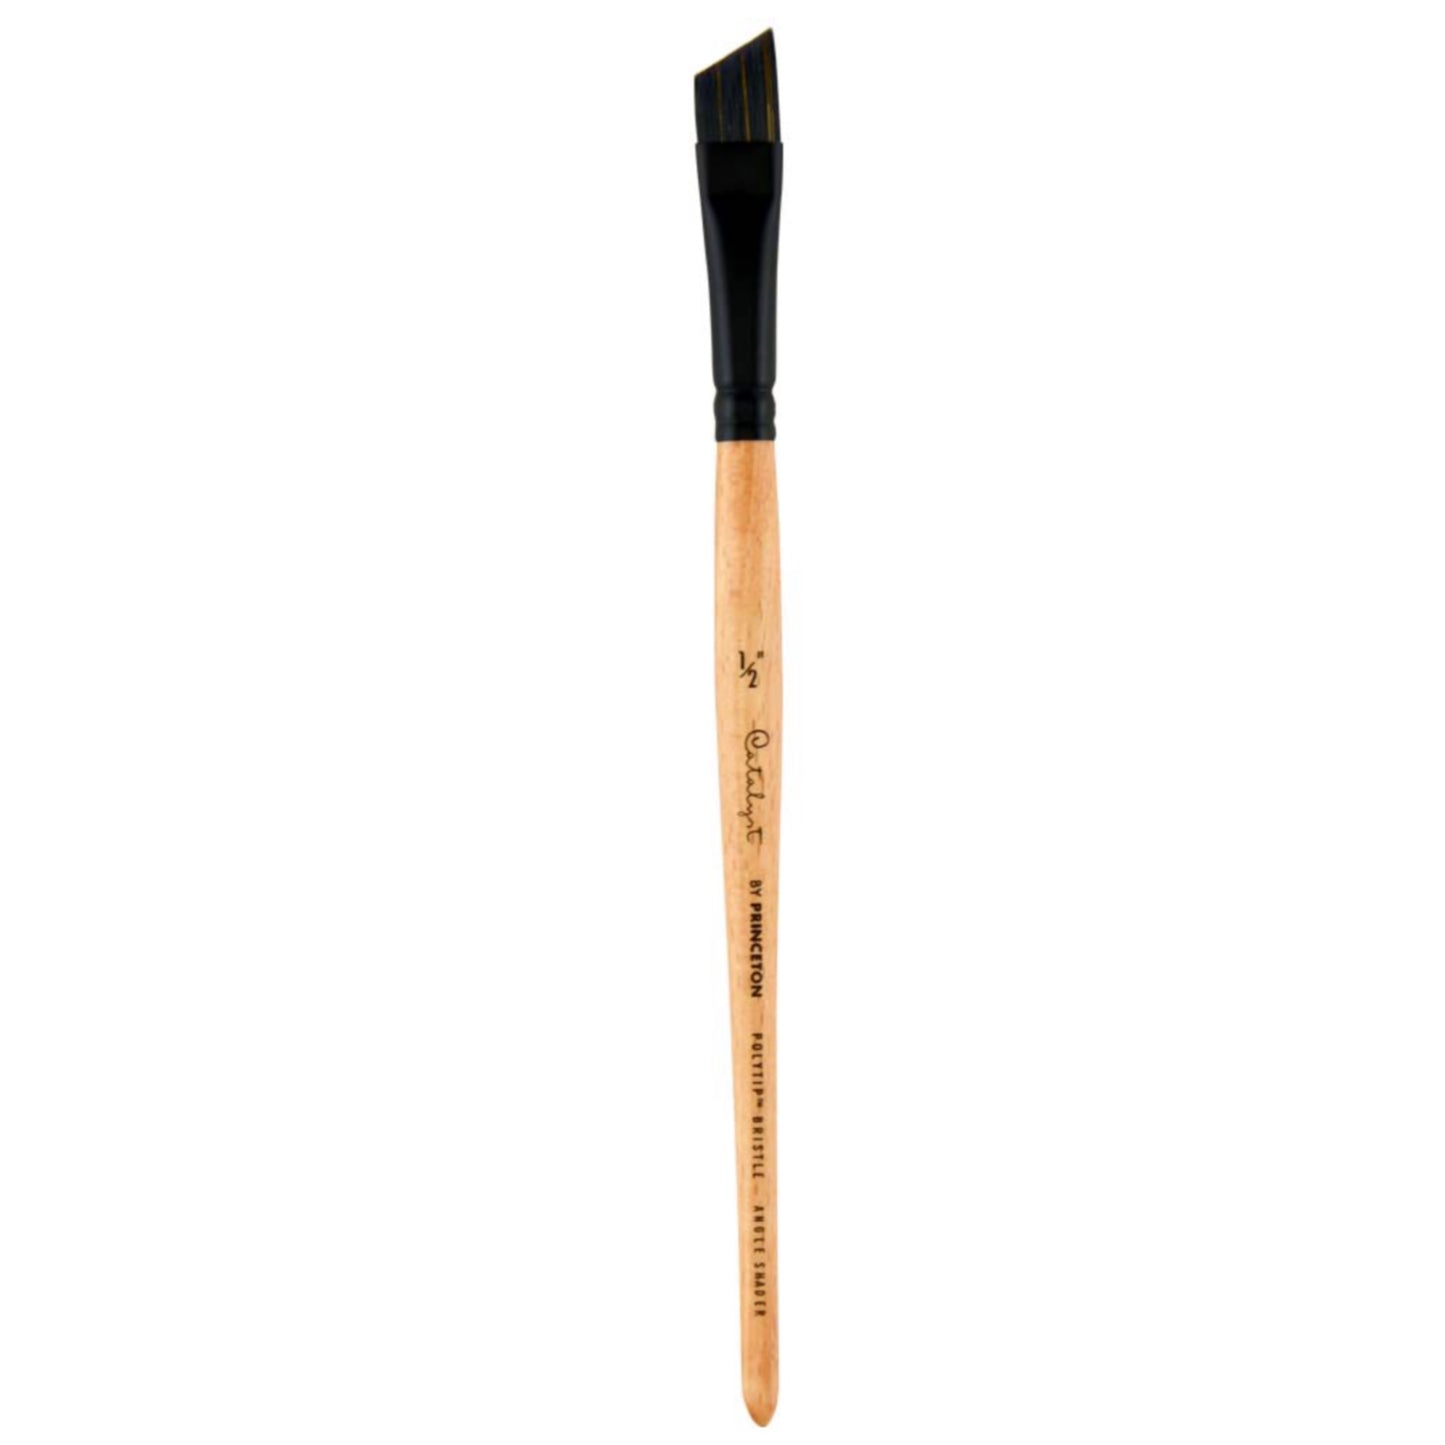 Princeton Catalyst Polytip Bristle Short-Handle Paint Brushes - Angle Shader / 1/2" by Princeton Art & Brush Co - K. A. Artist Shop